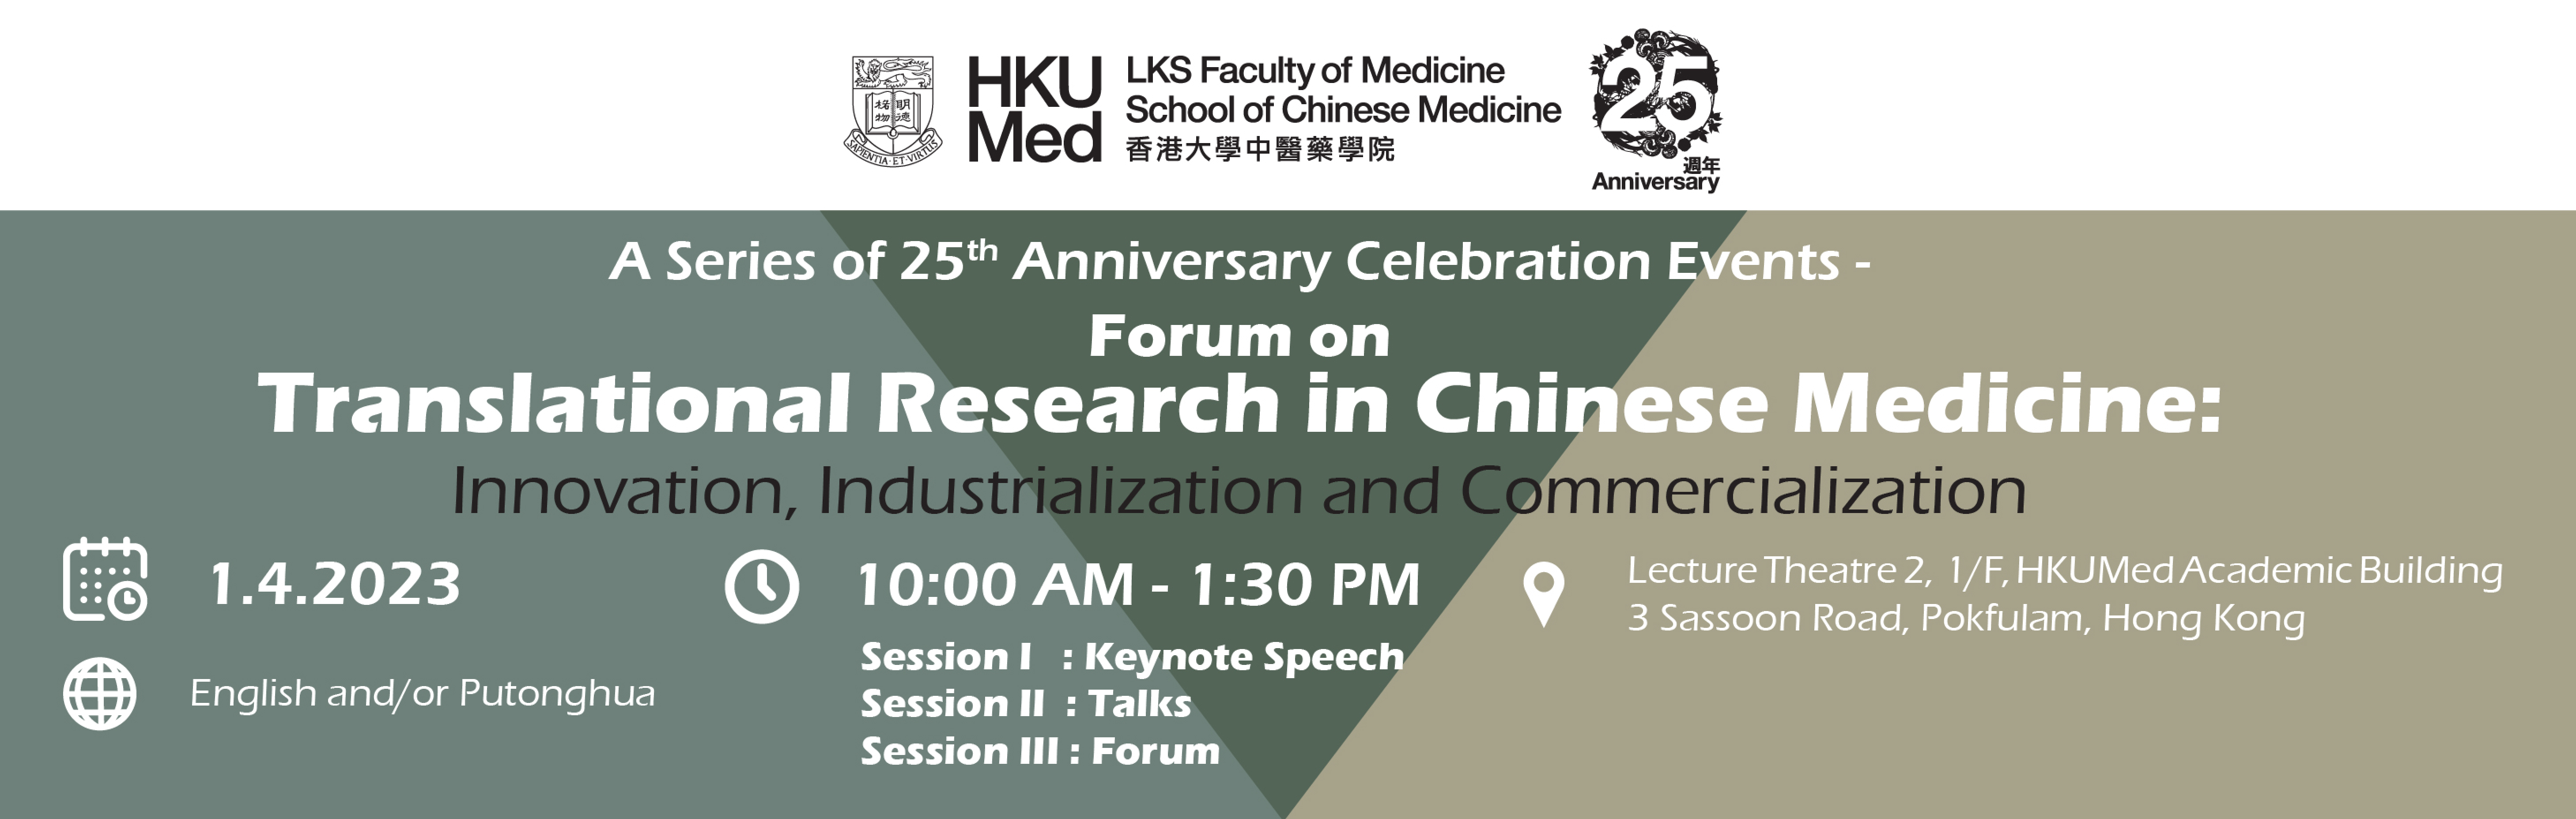 Forum on Translational Research in Chinese Medicine: Innovation, Industrialization and Commercialization eng